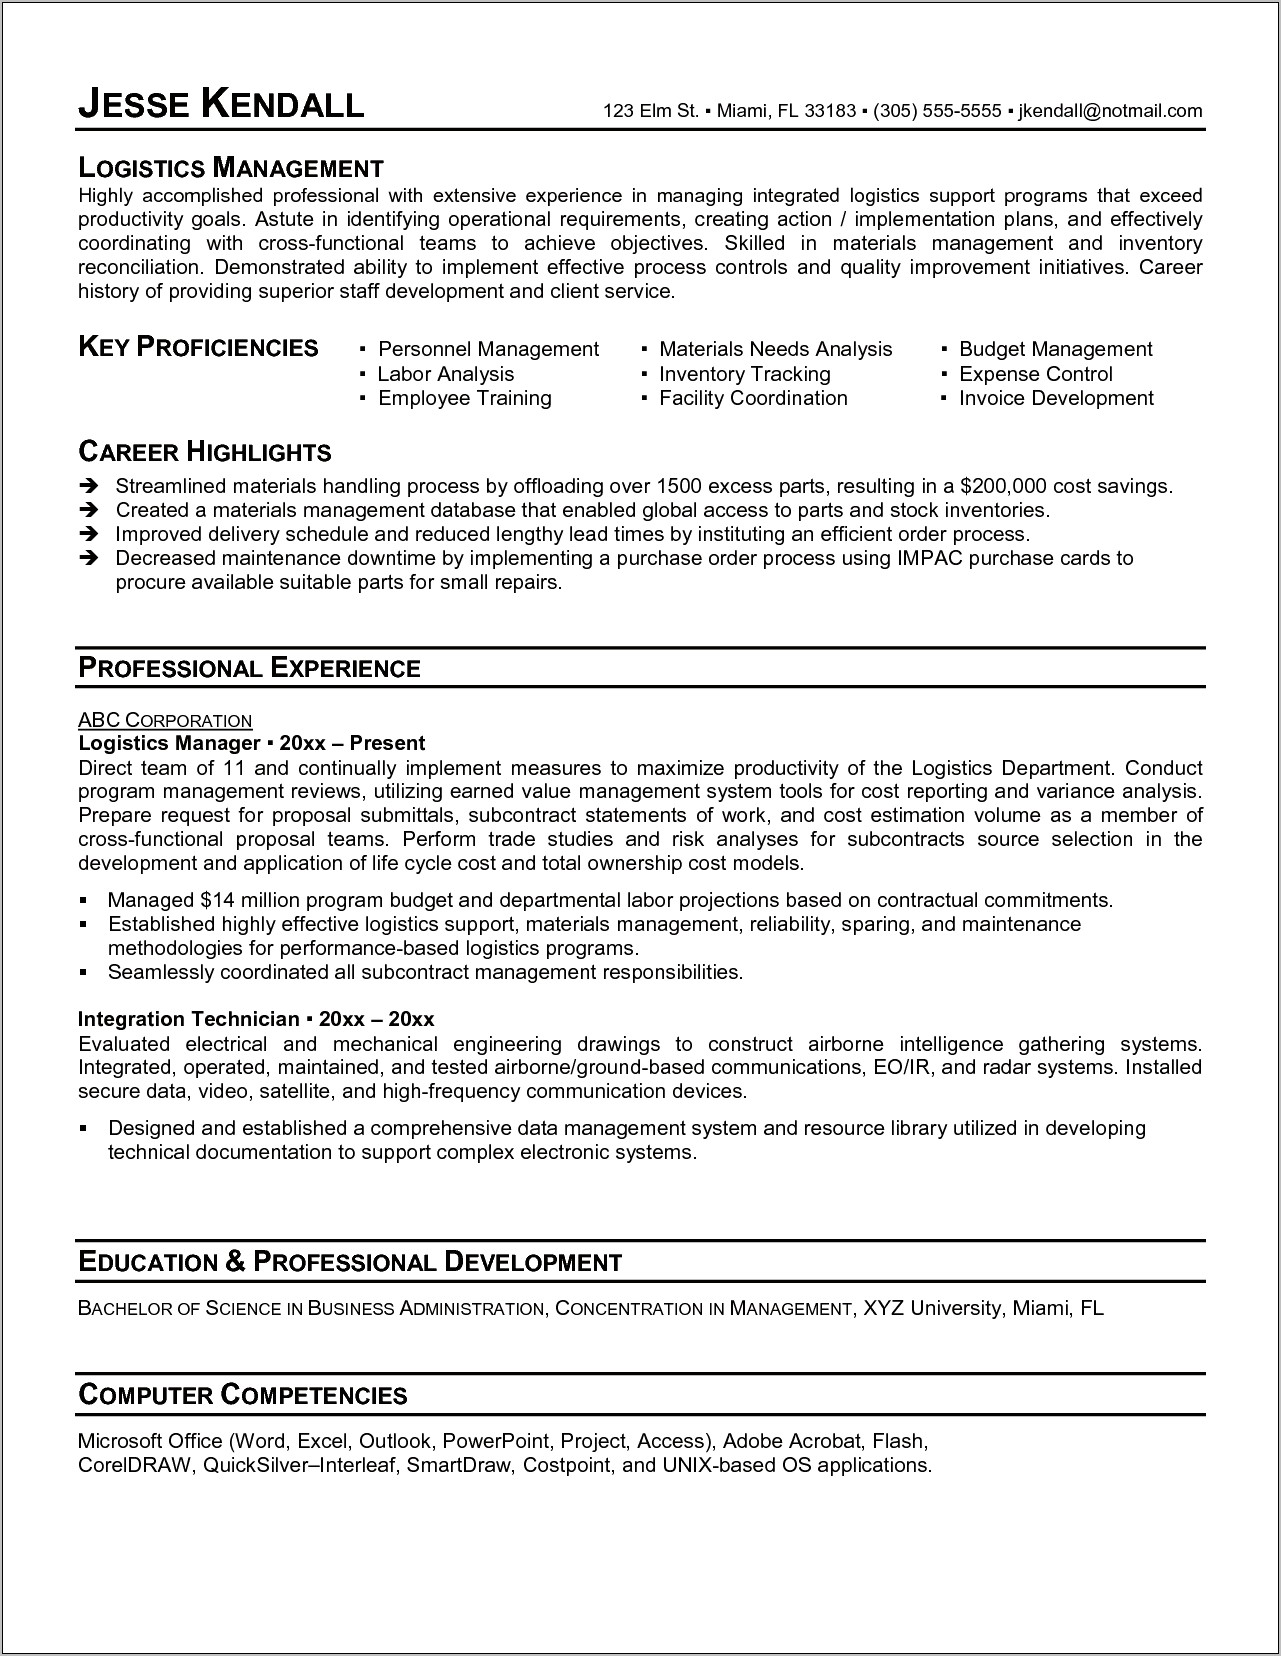 Jesse Kendall Resume Template Technical Project Management